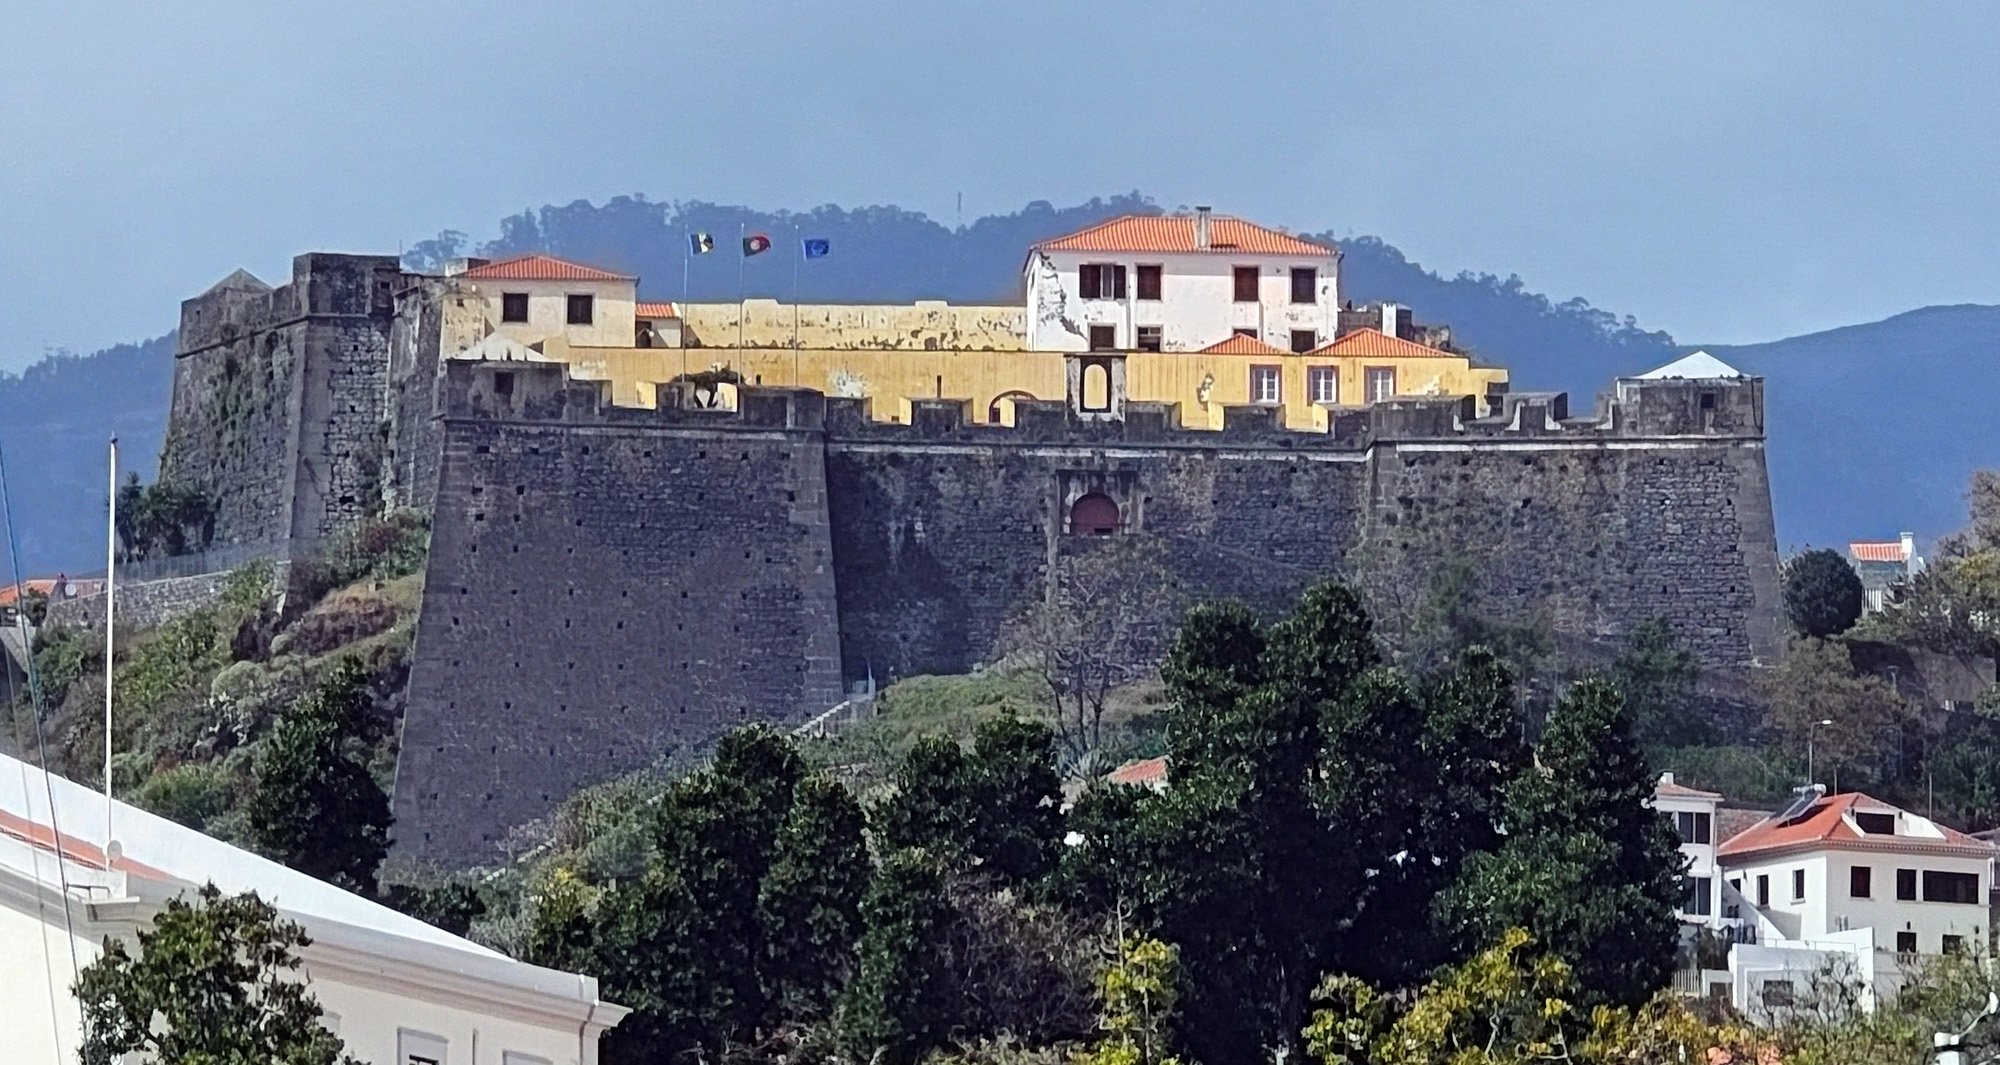 Fortaleza de São João Baptista do Pico overlooking Funchal. If you're a fan of history you have lots to explore here.